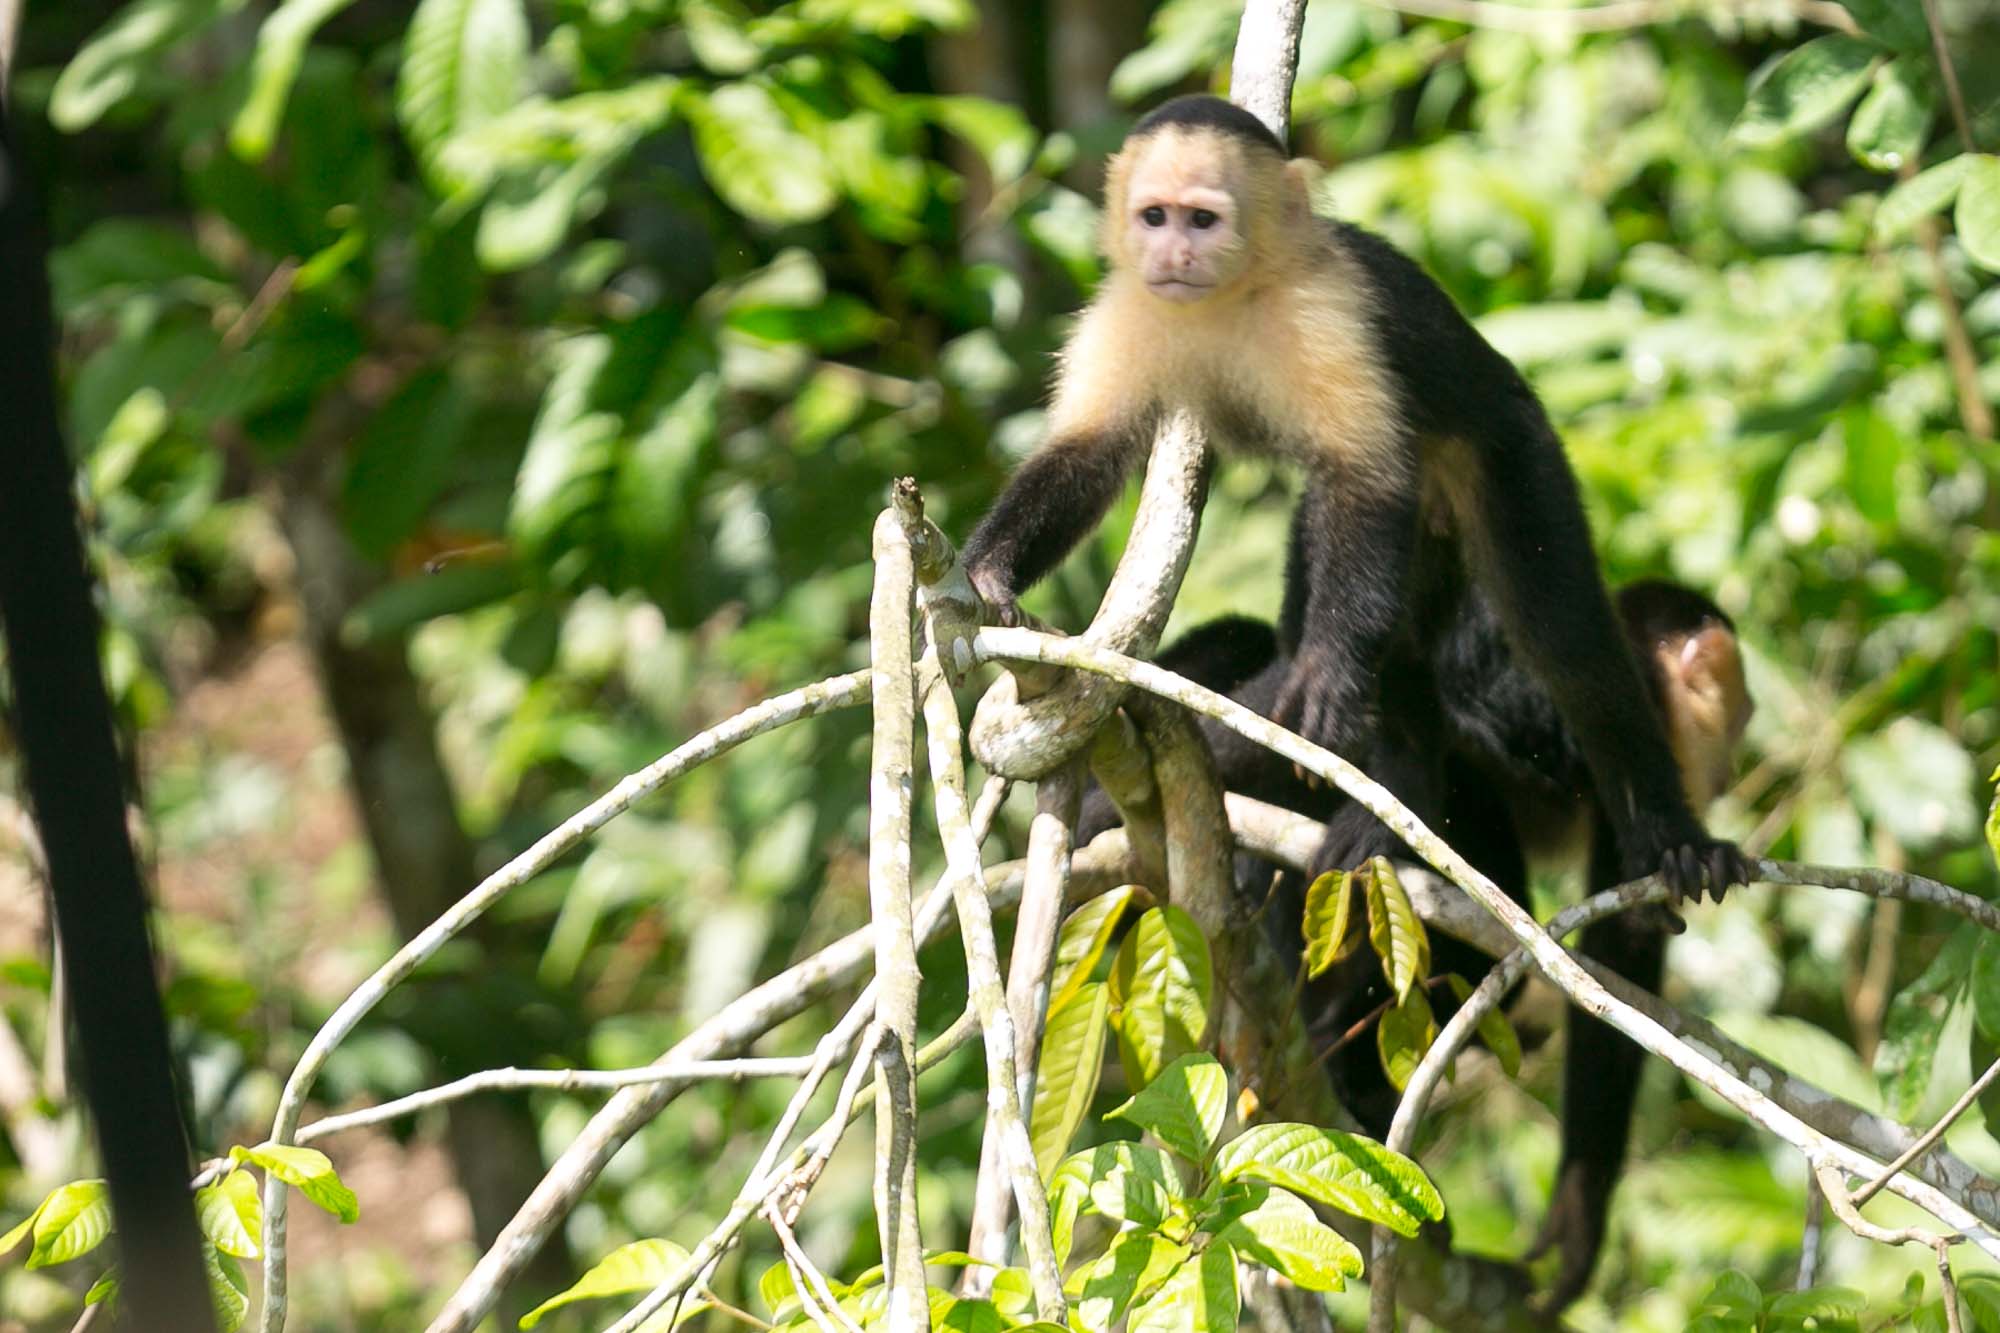 White faced capuchin in tree on Monkey Island